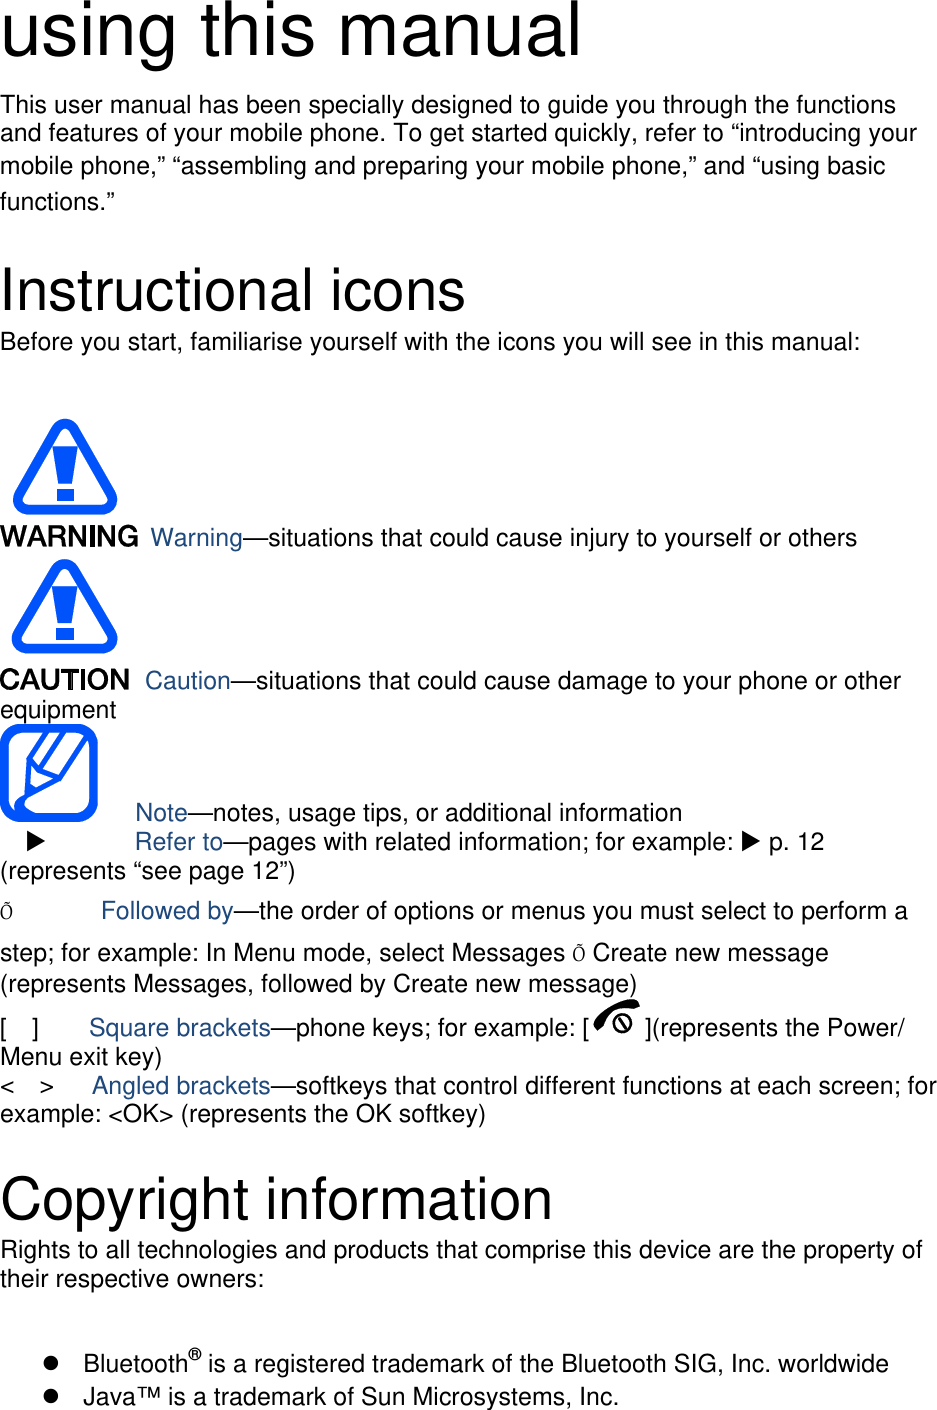 using this manual This user manual has been specially designed to guide you through the functions and features of your mobile phone. To get started quickly, refer to “introducing your mobile phone,” “assembling and preparing your mobile phone,” and “using basic functions.”  Instructional icons Before you start, familiarise yourself with the icons you will see in this manual:     Warning—situations that could cause injury to yourself or others  Caution—situations that could cause damage to your phone or other equipment    Note—notes, usage tips, or additional information          Refer to—pages with related information; for example:  p. 12 (represents “see page 12”) Õ       Followed by—the order of options or menus you must select to perform a step; for example: In Menu mode, select Messages Õ Create new message (represents Messages, followed by Create new message) [  ]    Square brackets—phone keys; for example: [ ](represents the Power/ Menu exit key) &lt;  &gt;   Angled brackets—softkeys that control different functions at each screen; for example: &lt;OK&gt; (represents the OK softkey)  Copyright information Rights to all technologies and products that comprise this device are the property of their respective owners:   Bluetooth® is a registered trademark of the Bluetooth SIG, Inc. worldwide   Java™ is a trademark of Sun Microsystems, Inc. 